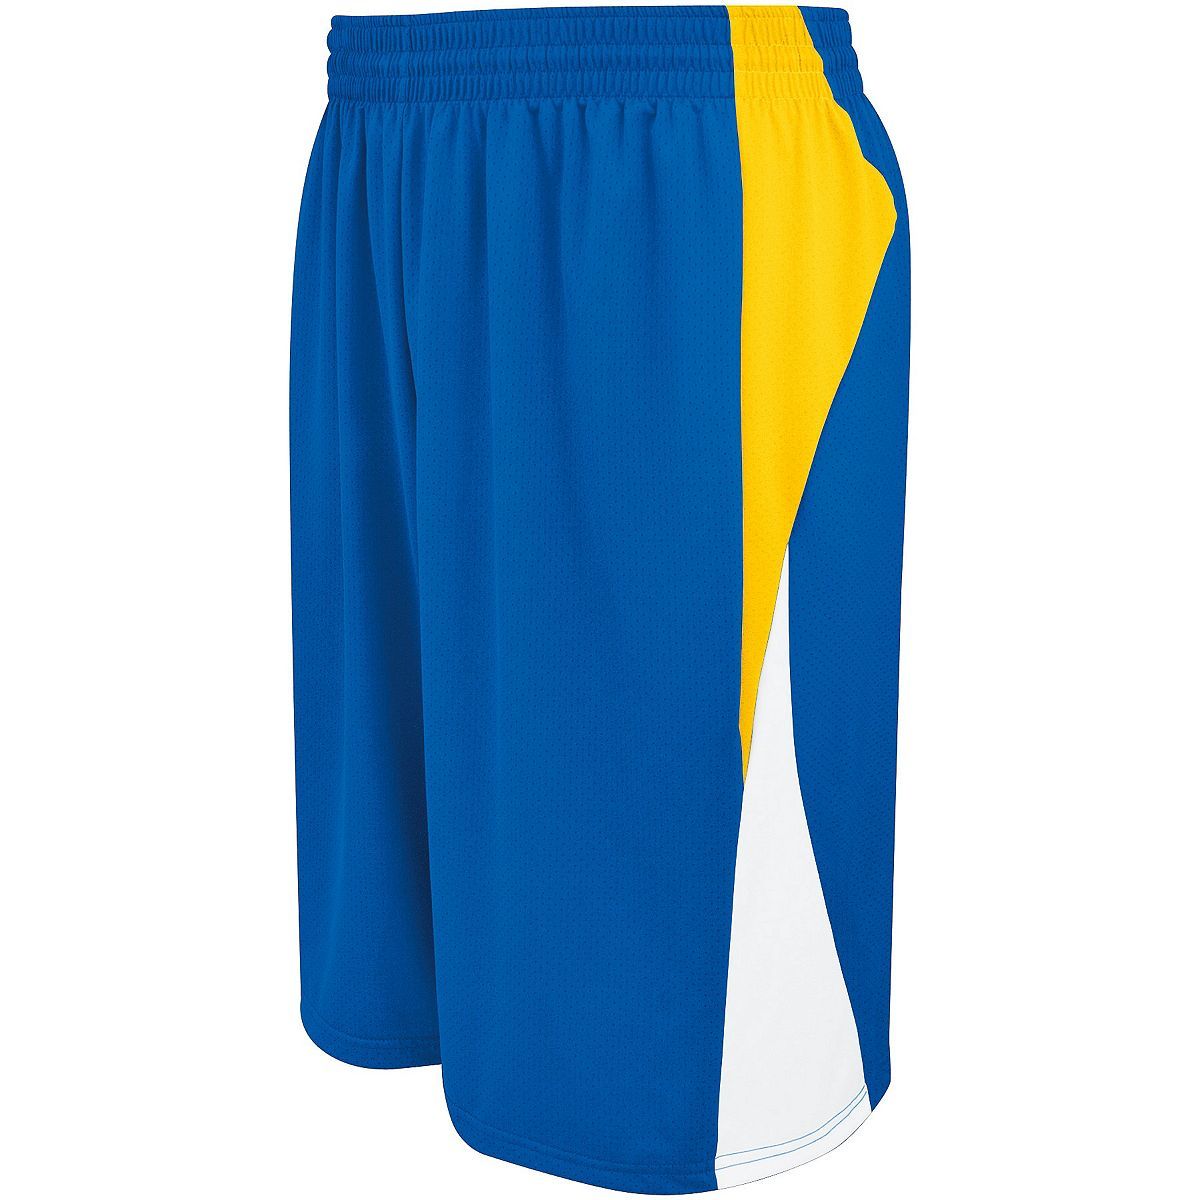 Holloway Campus Reversible Shorts in Royal/Athletic Gold/White  -Part of the Adult, Adult-Shorts, Basketball, Holloway, All-Sports, All-Sports-1 product lines at KanaleyCreations.com